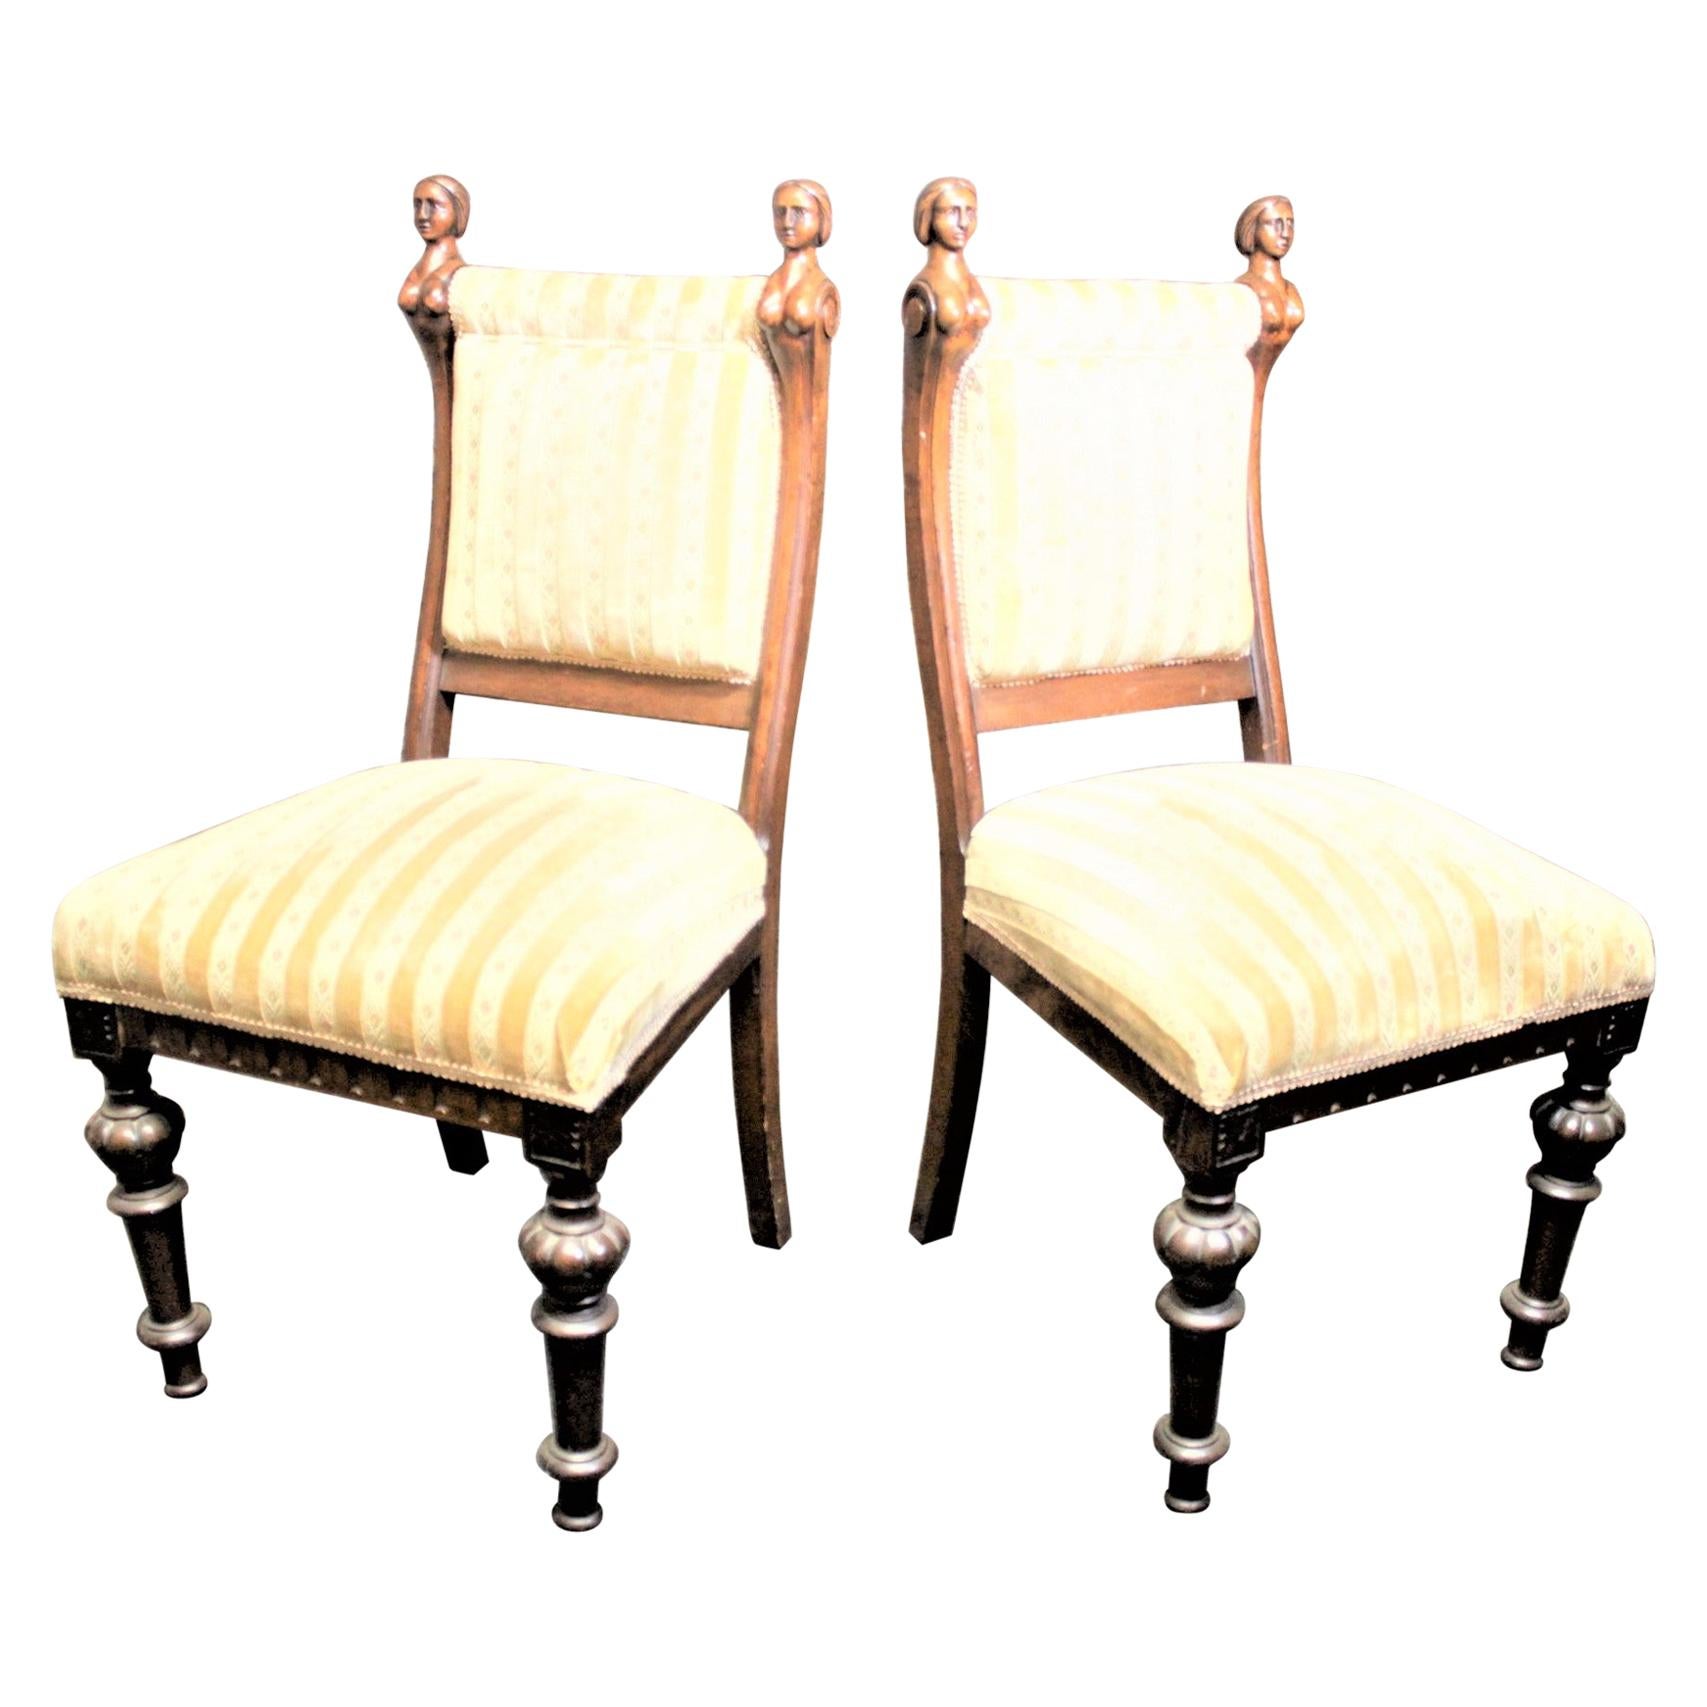 Pair of Antique American Carved Walnut Parlor Chairs with Erotic Female Accents